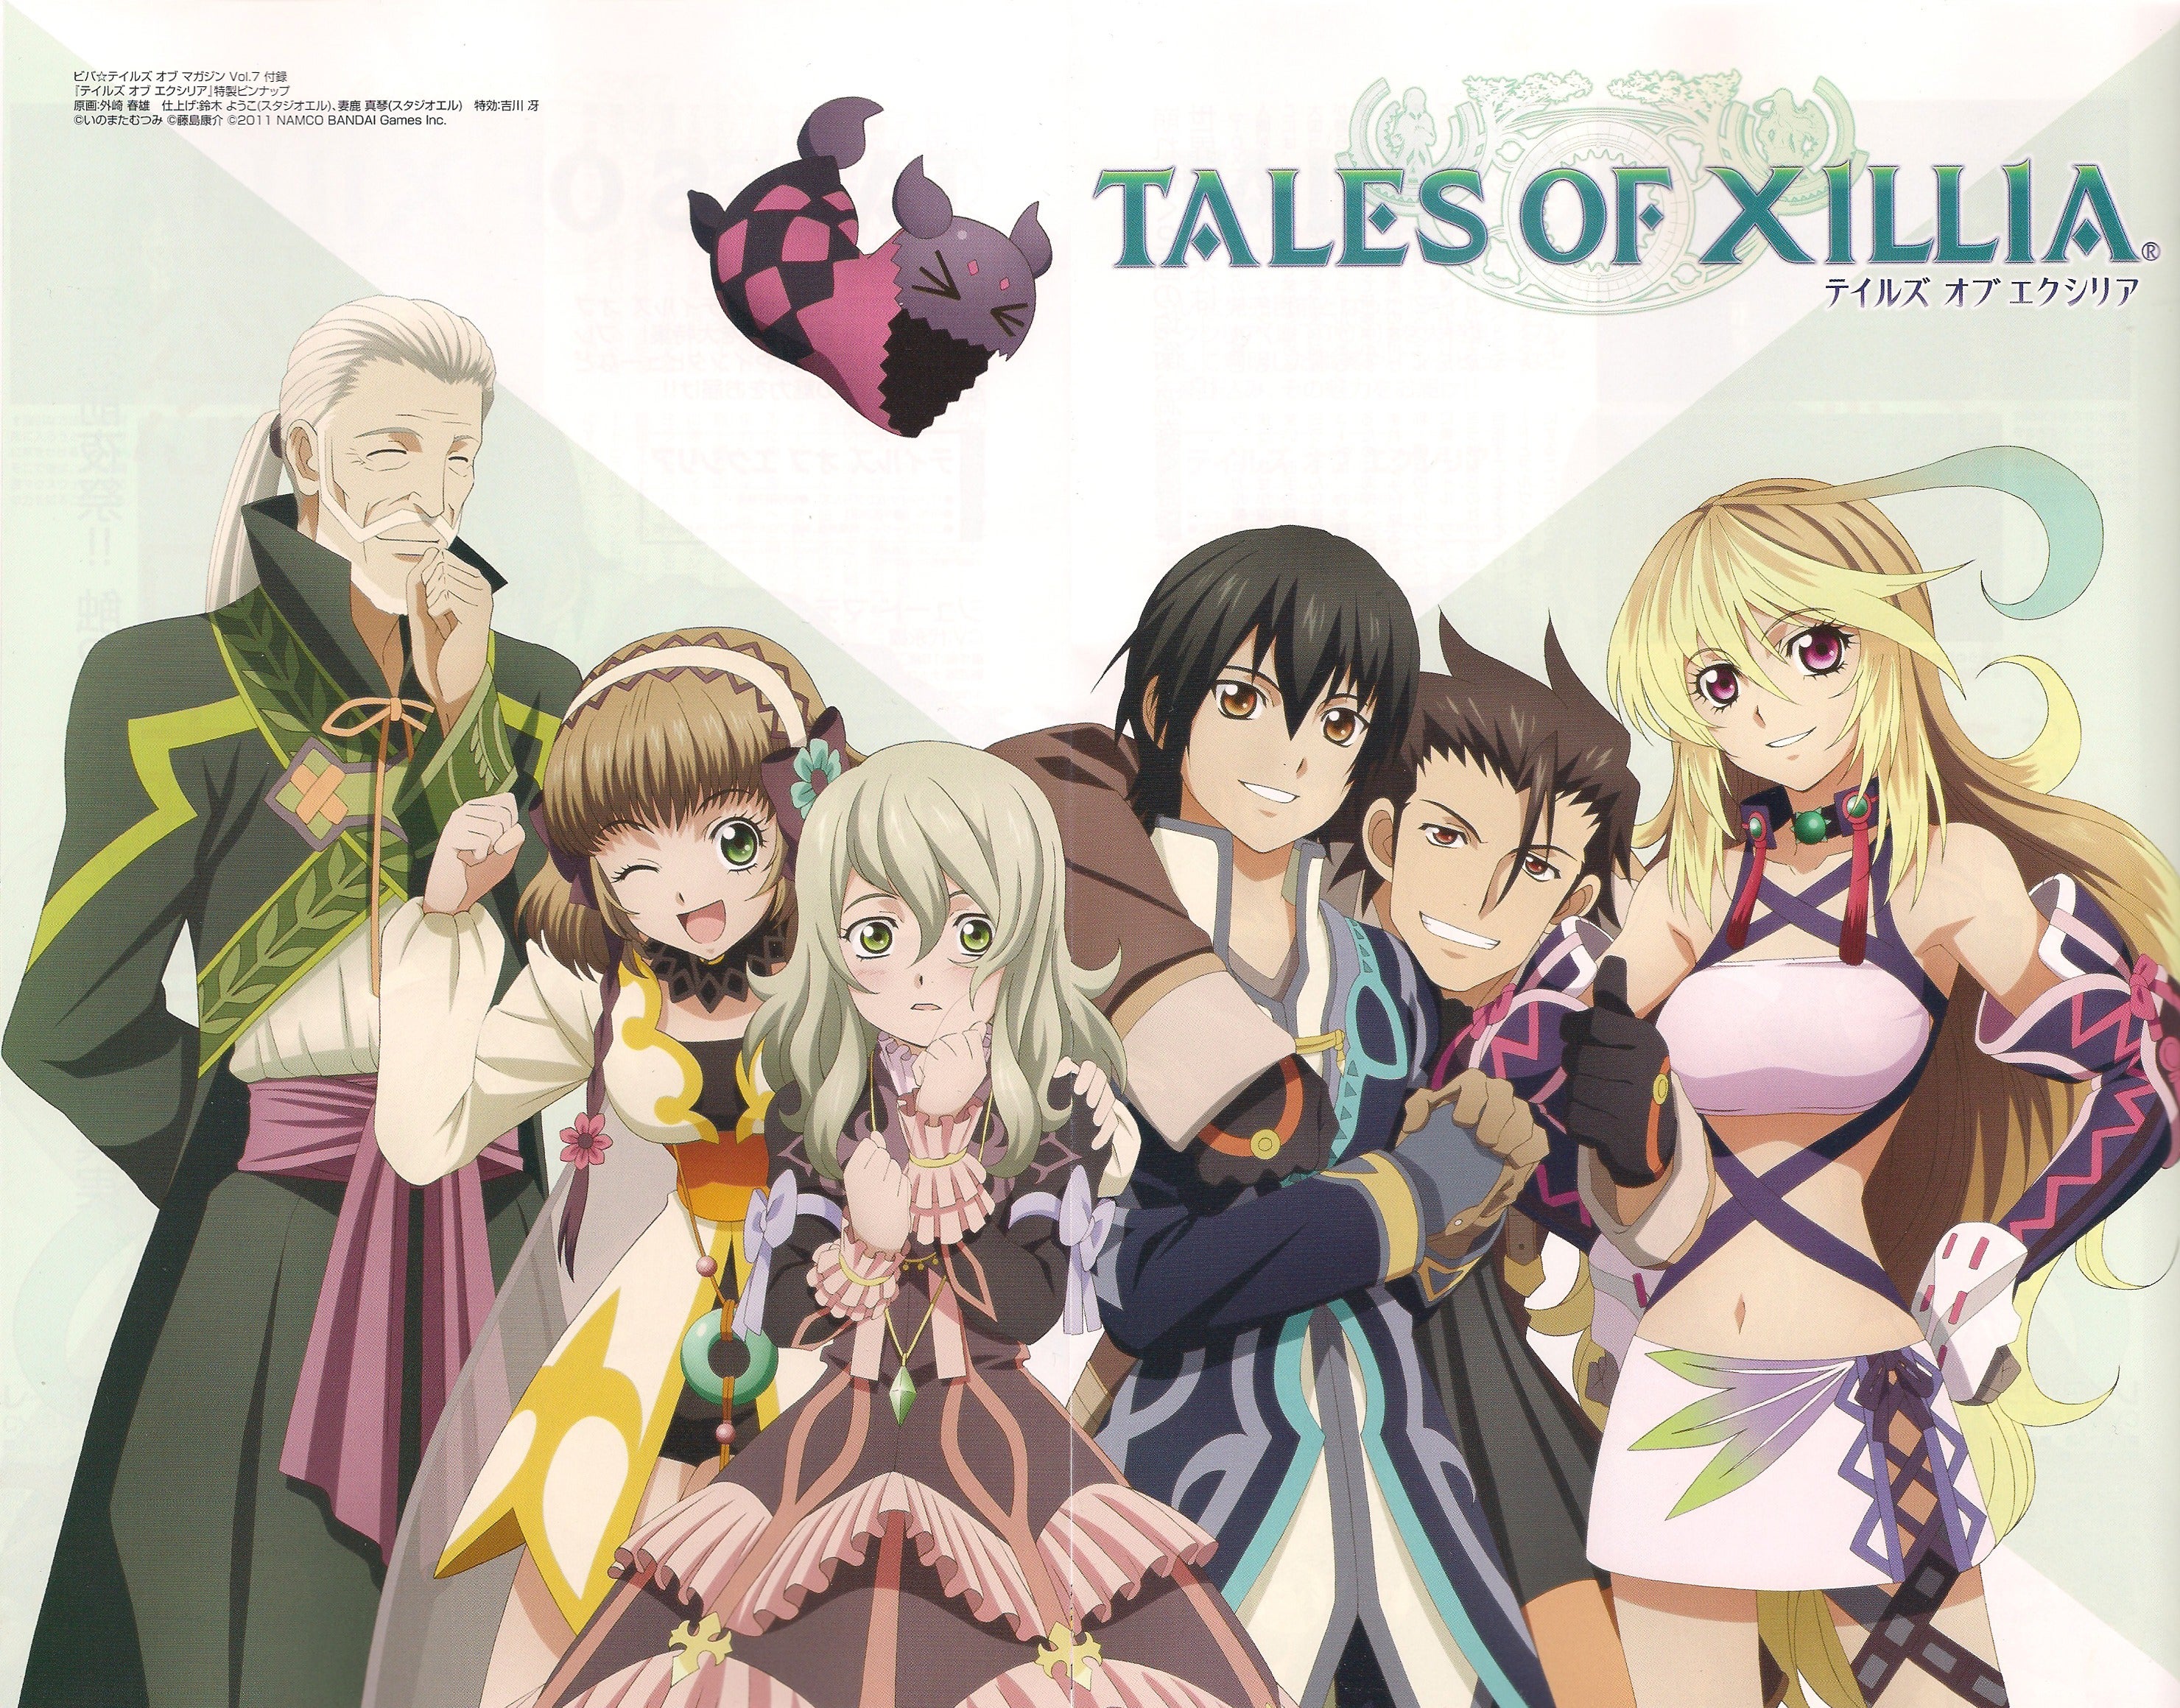 My Thoughts On Tales Of Xillia